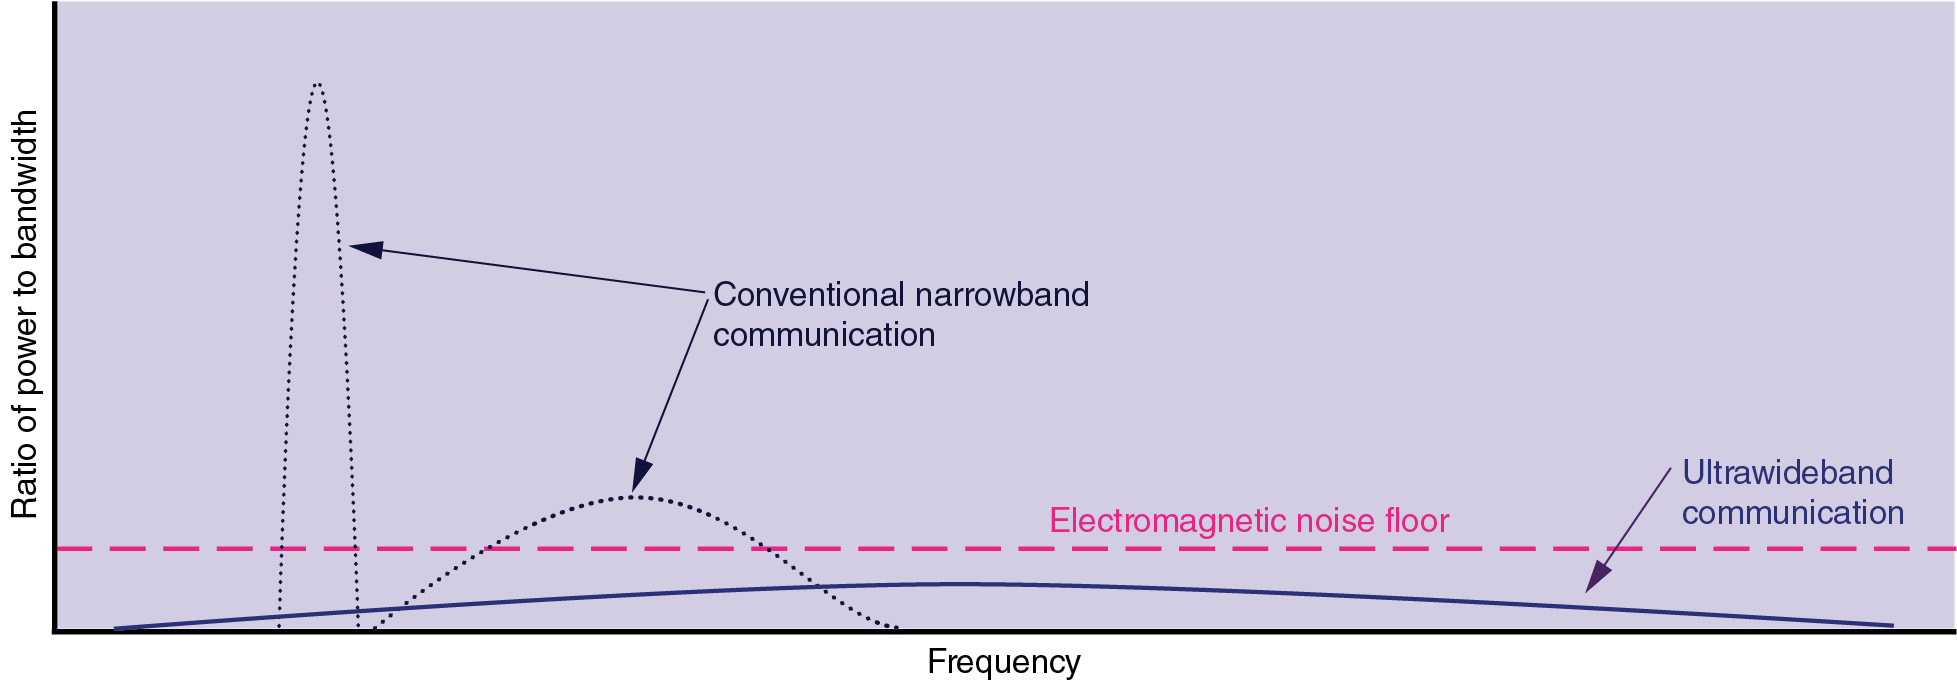 A line graph showing the difference between communication bands.